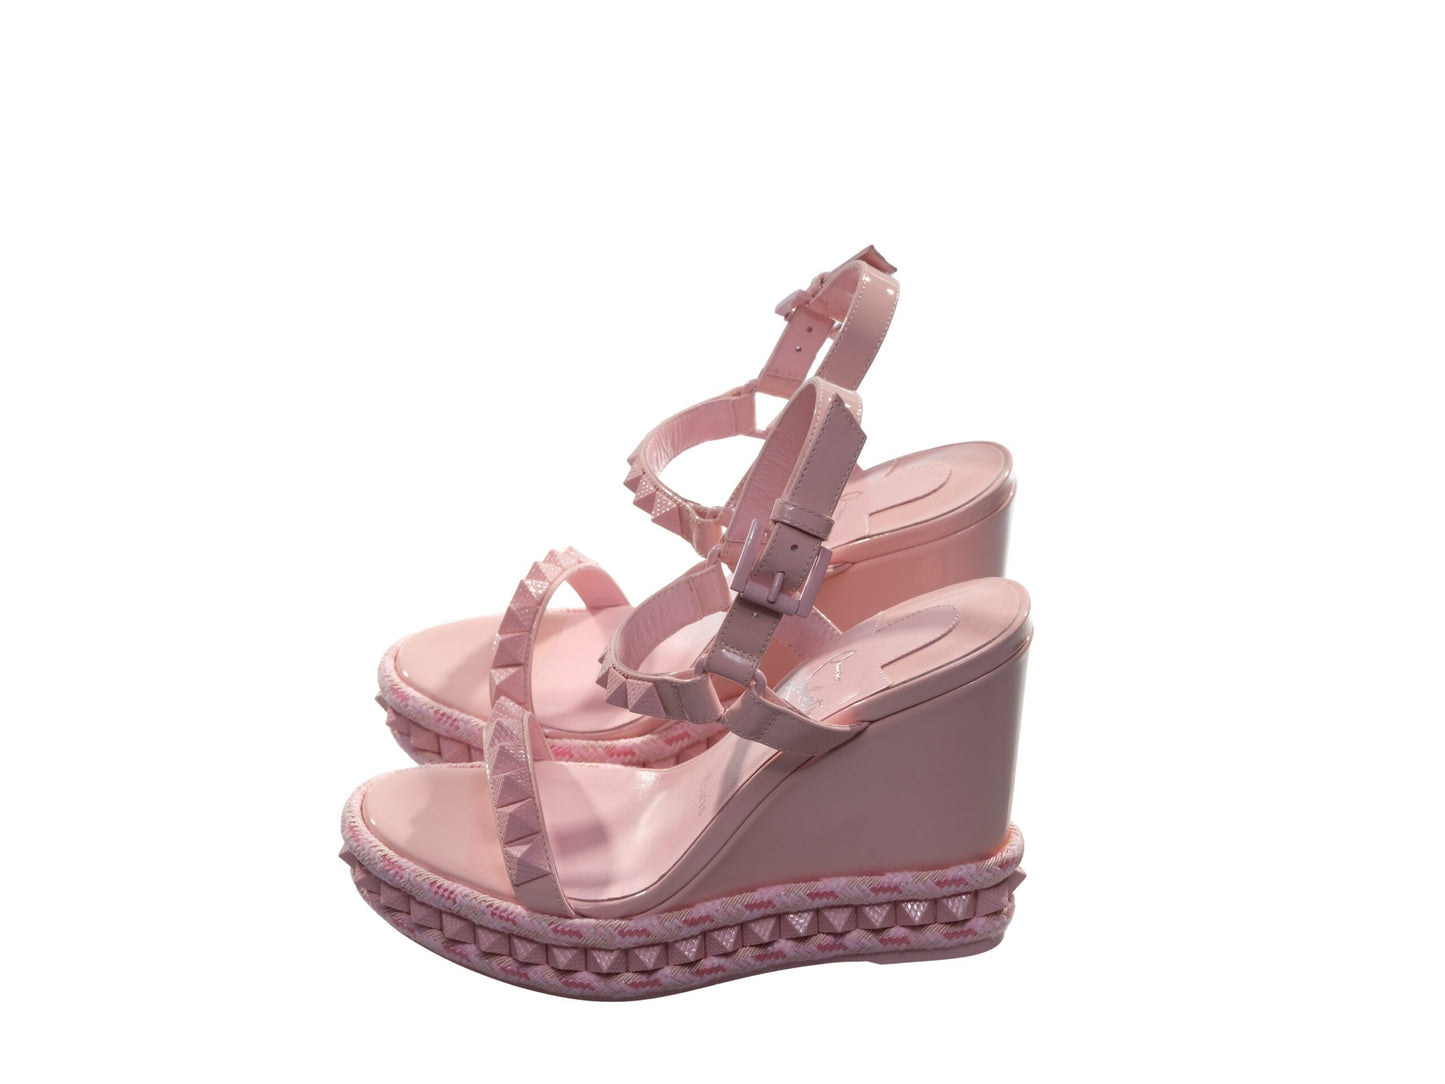 Christian Louboutin Pyraclou 100 Rosy Pink Studded Patent Leather High Heel Wedge Sandals